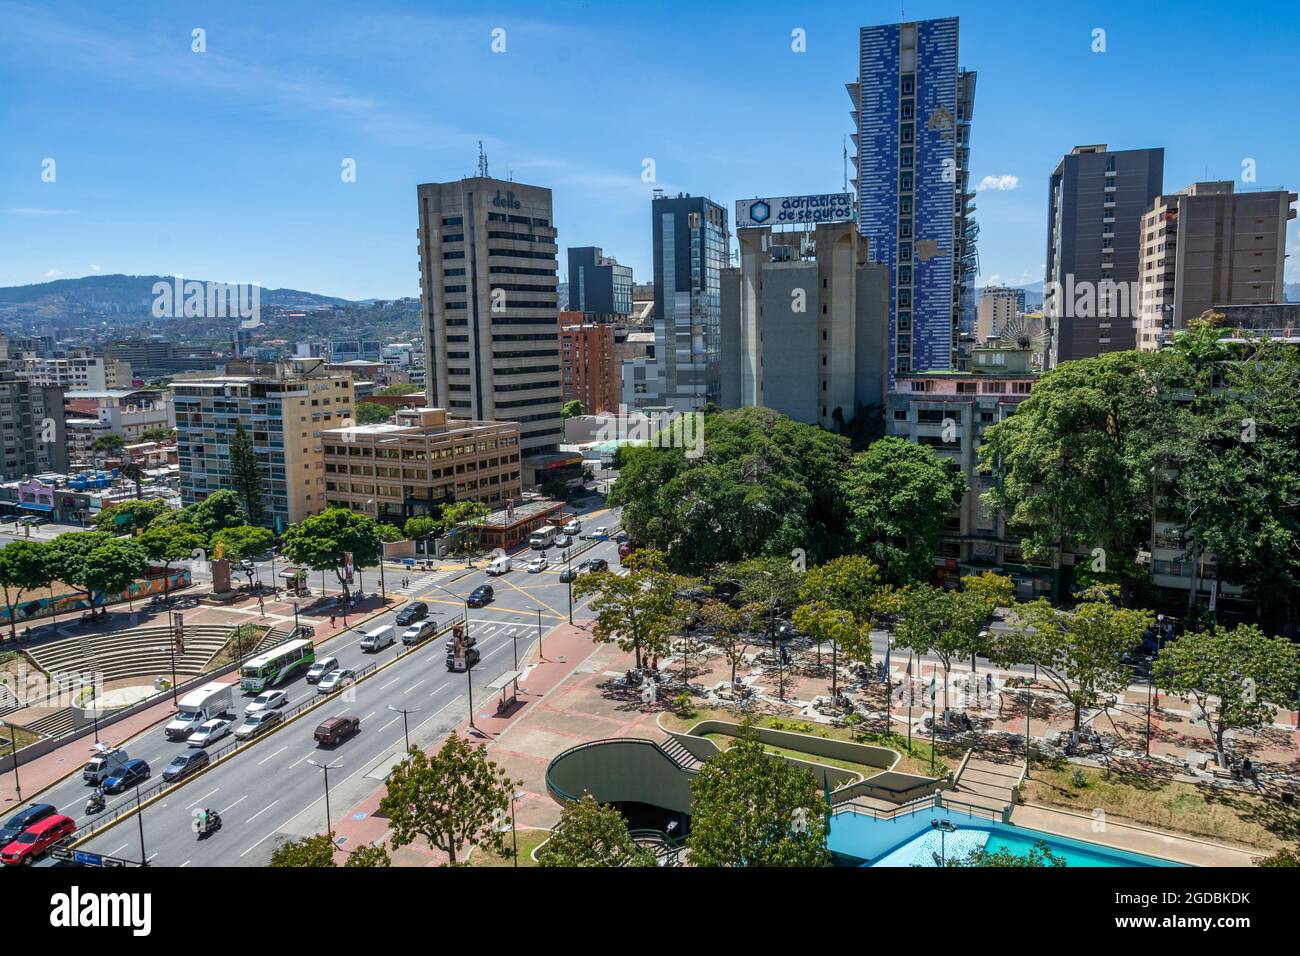 View of Plaza Francia de Altamira, municipality of Chacao (also known as Plaza Altamira), in the heart of Caracas, capital of Venezuela and Francisco Stock Photo